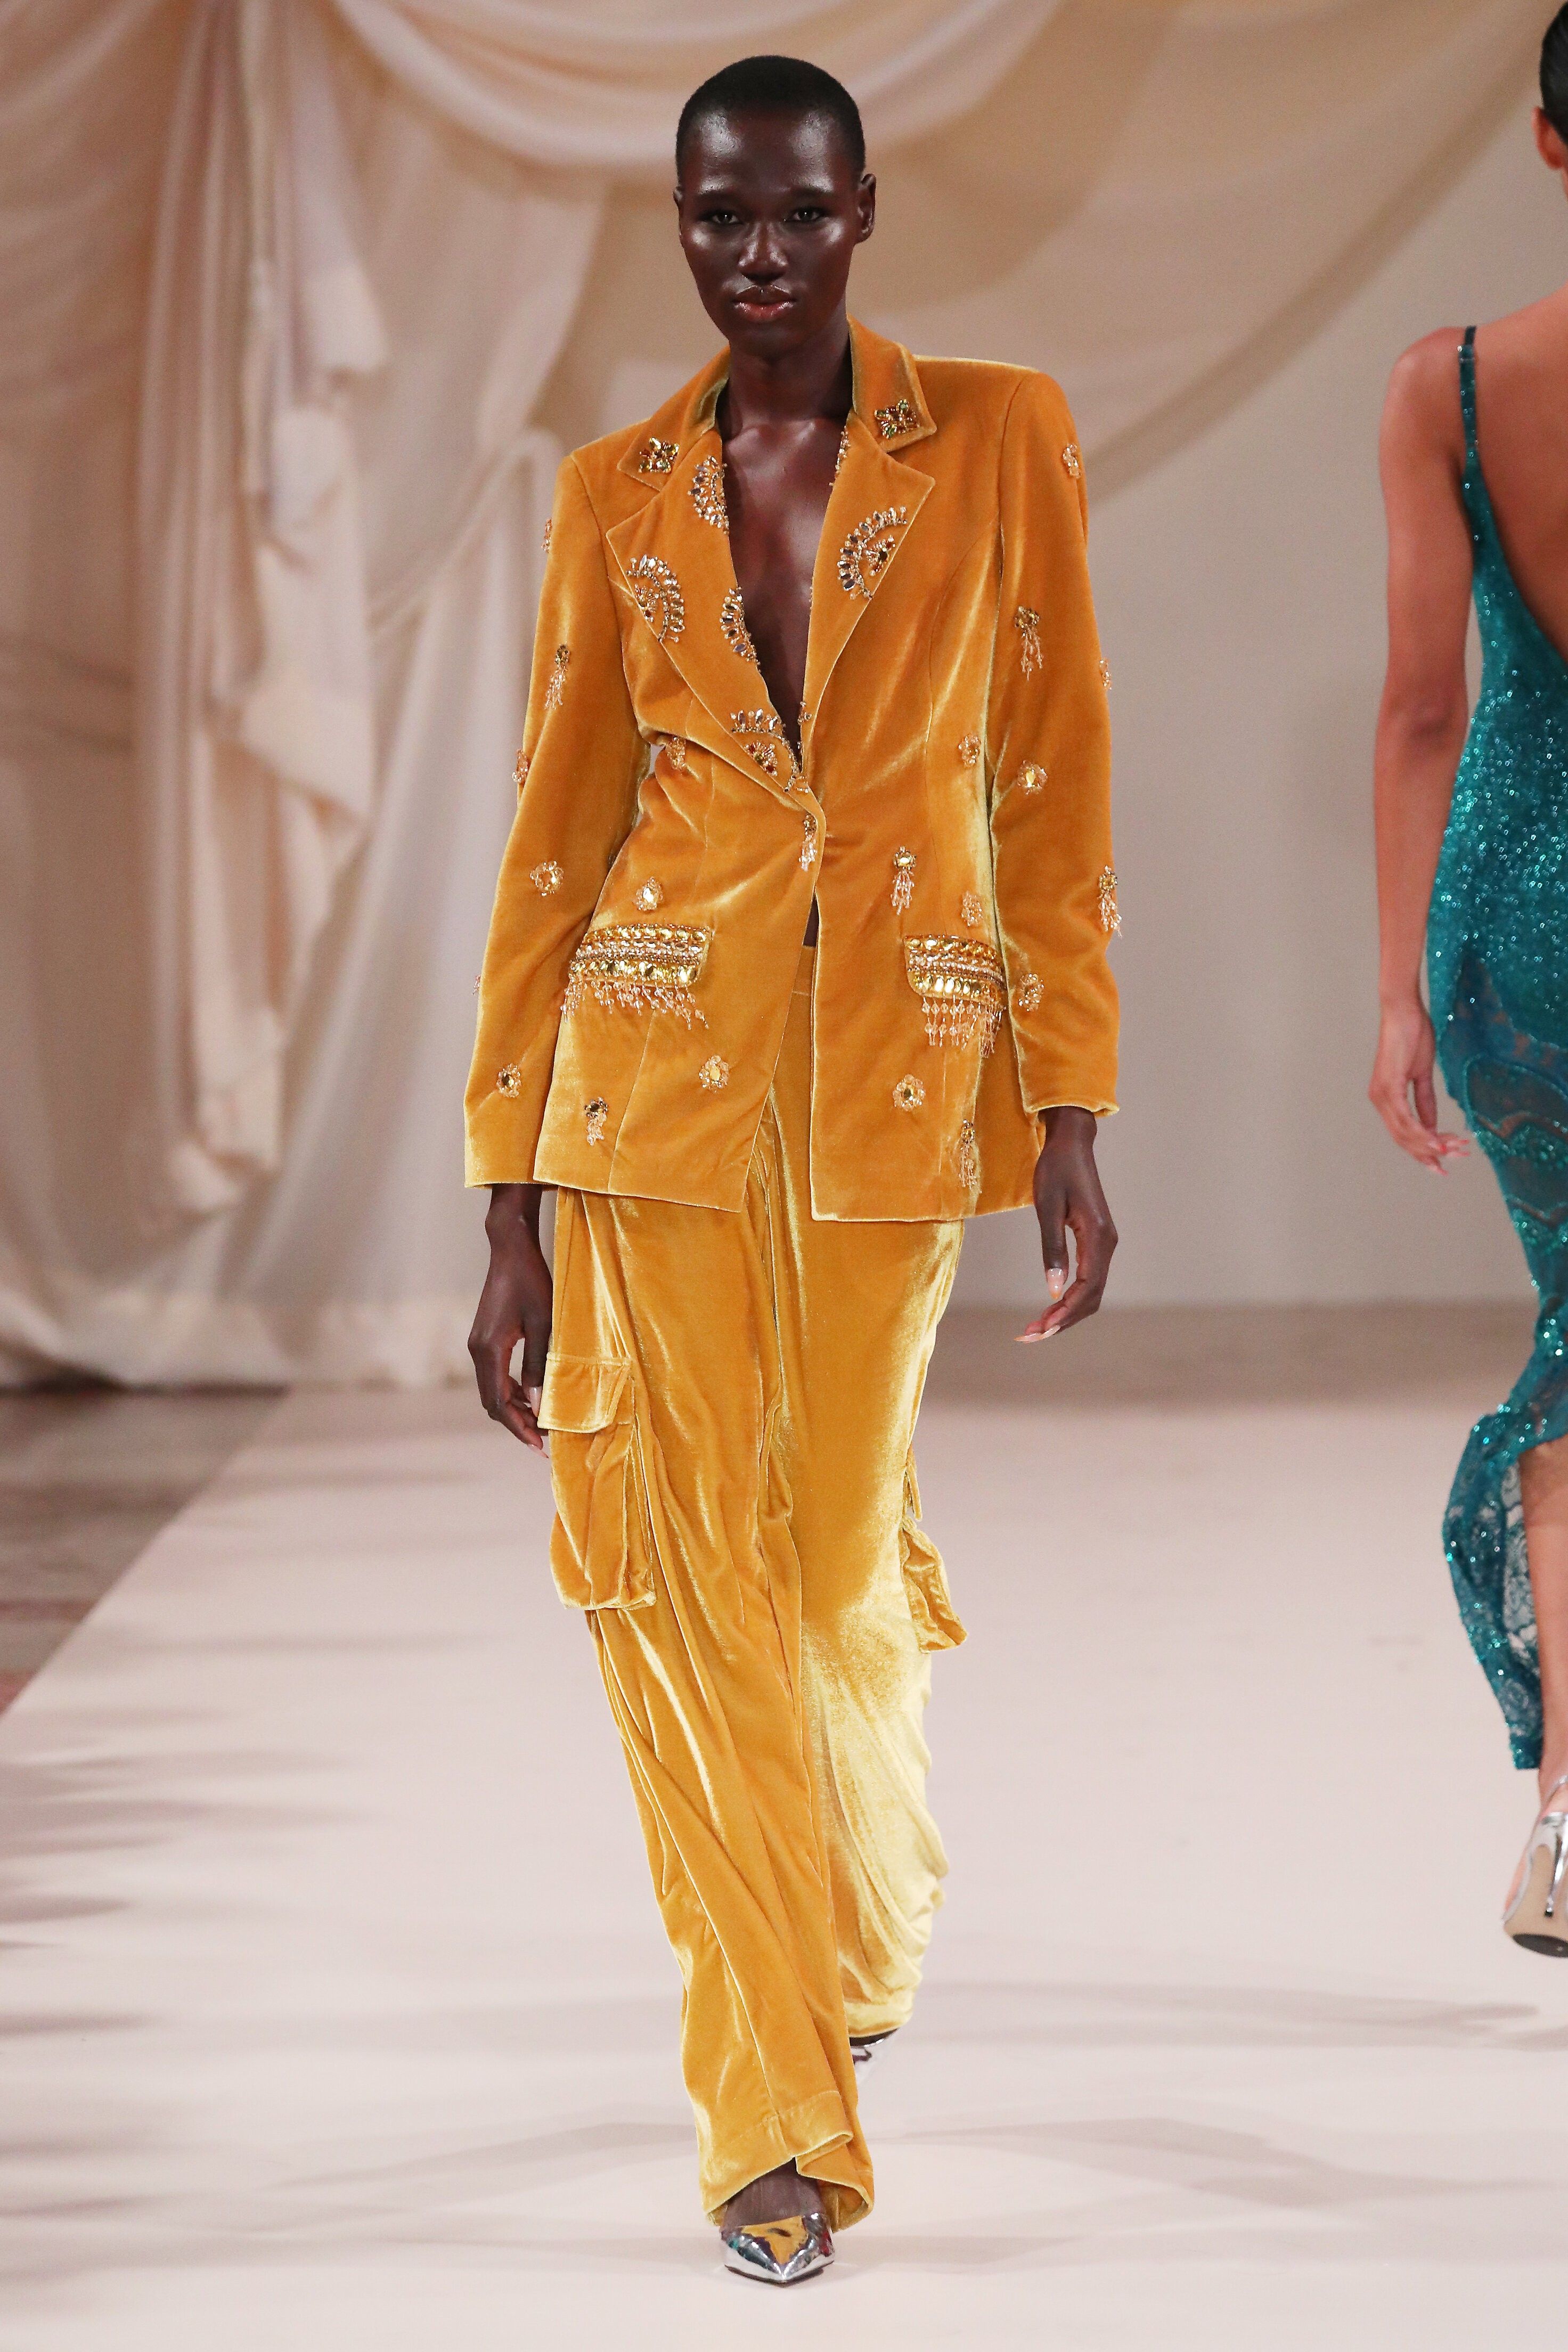 Here Are The Spring 2023 Color Trends From The Runway - xoNecole:  Lifestyle, Culture, Love, Wellness